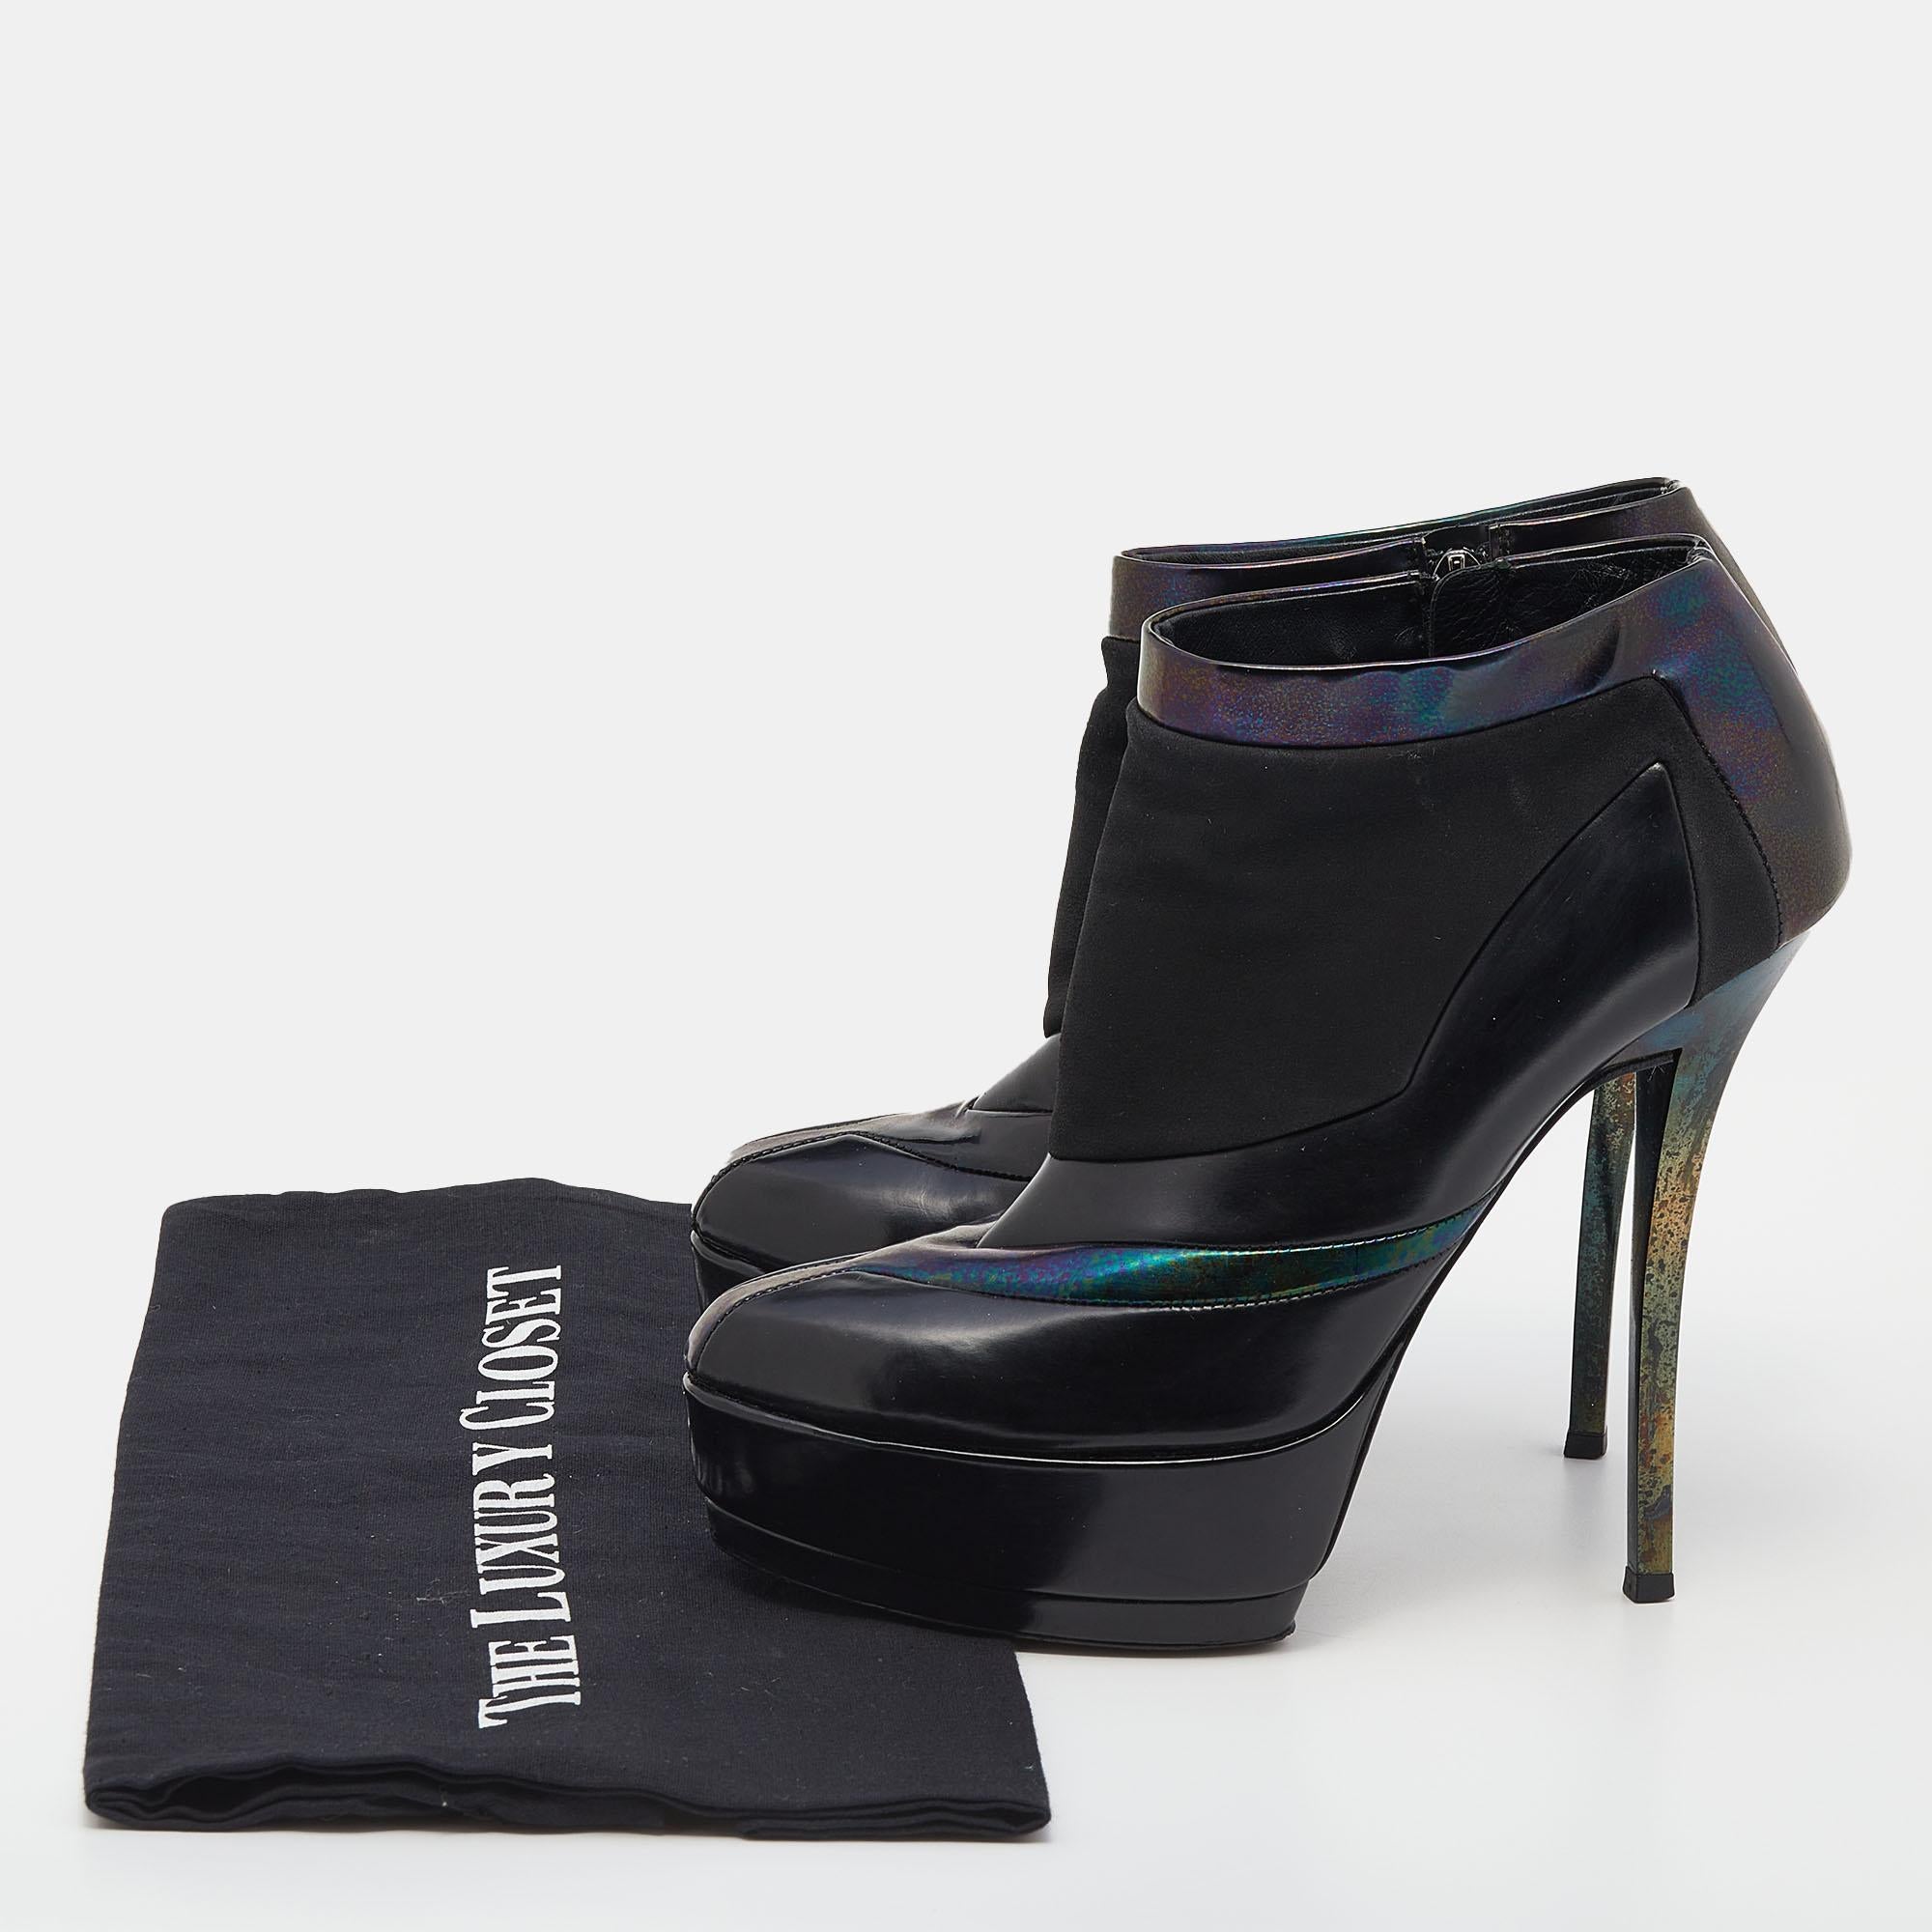 Gucci Black Holographic Leather And Suede Platform Ankle Length Boots Size 37 1